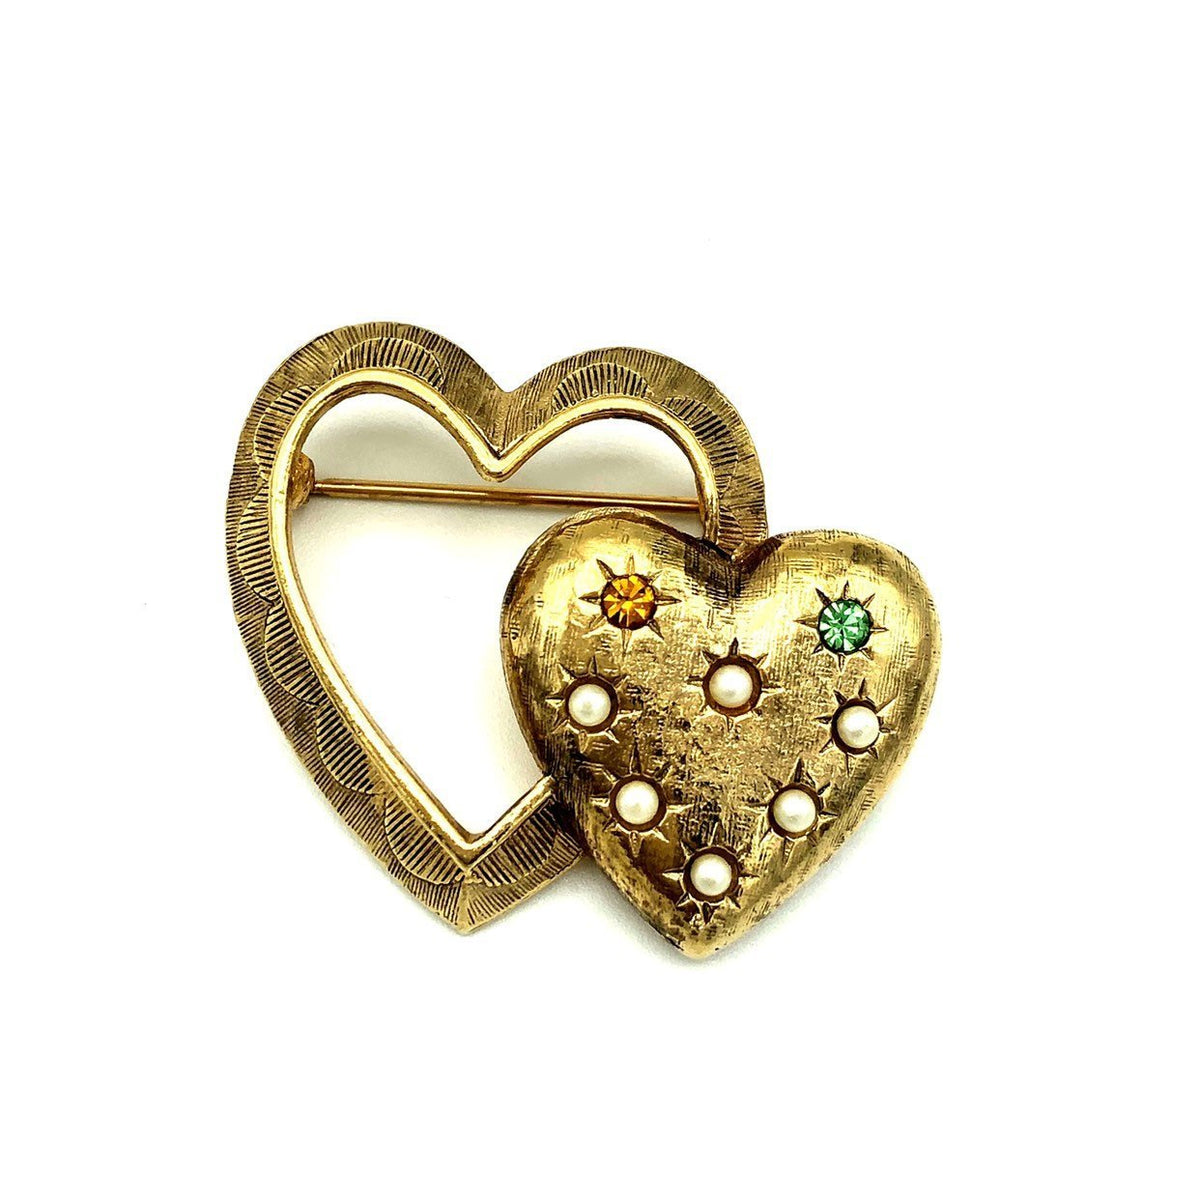 Gold Vintage Hearts Pearl Brooch Trio Scatter Pins - 24 Wishes Vintage Jewelry